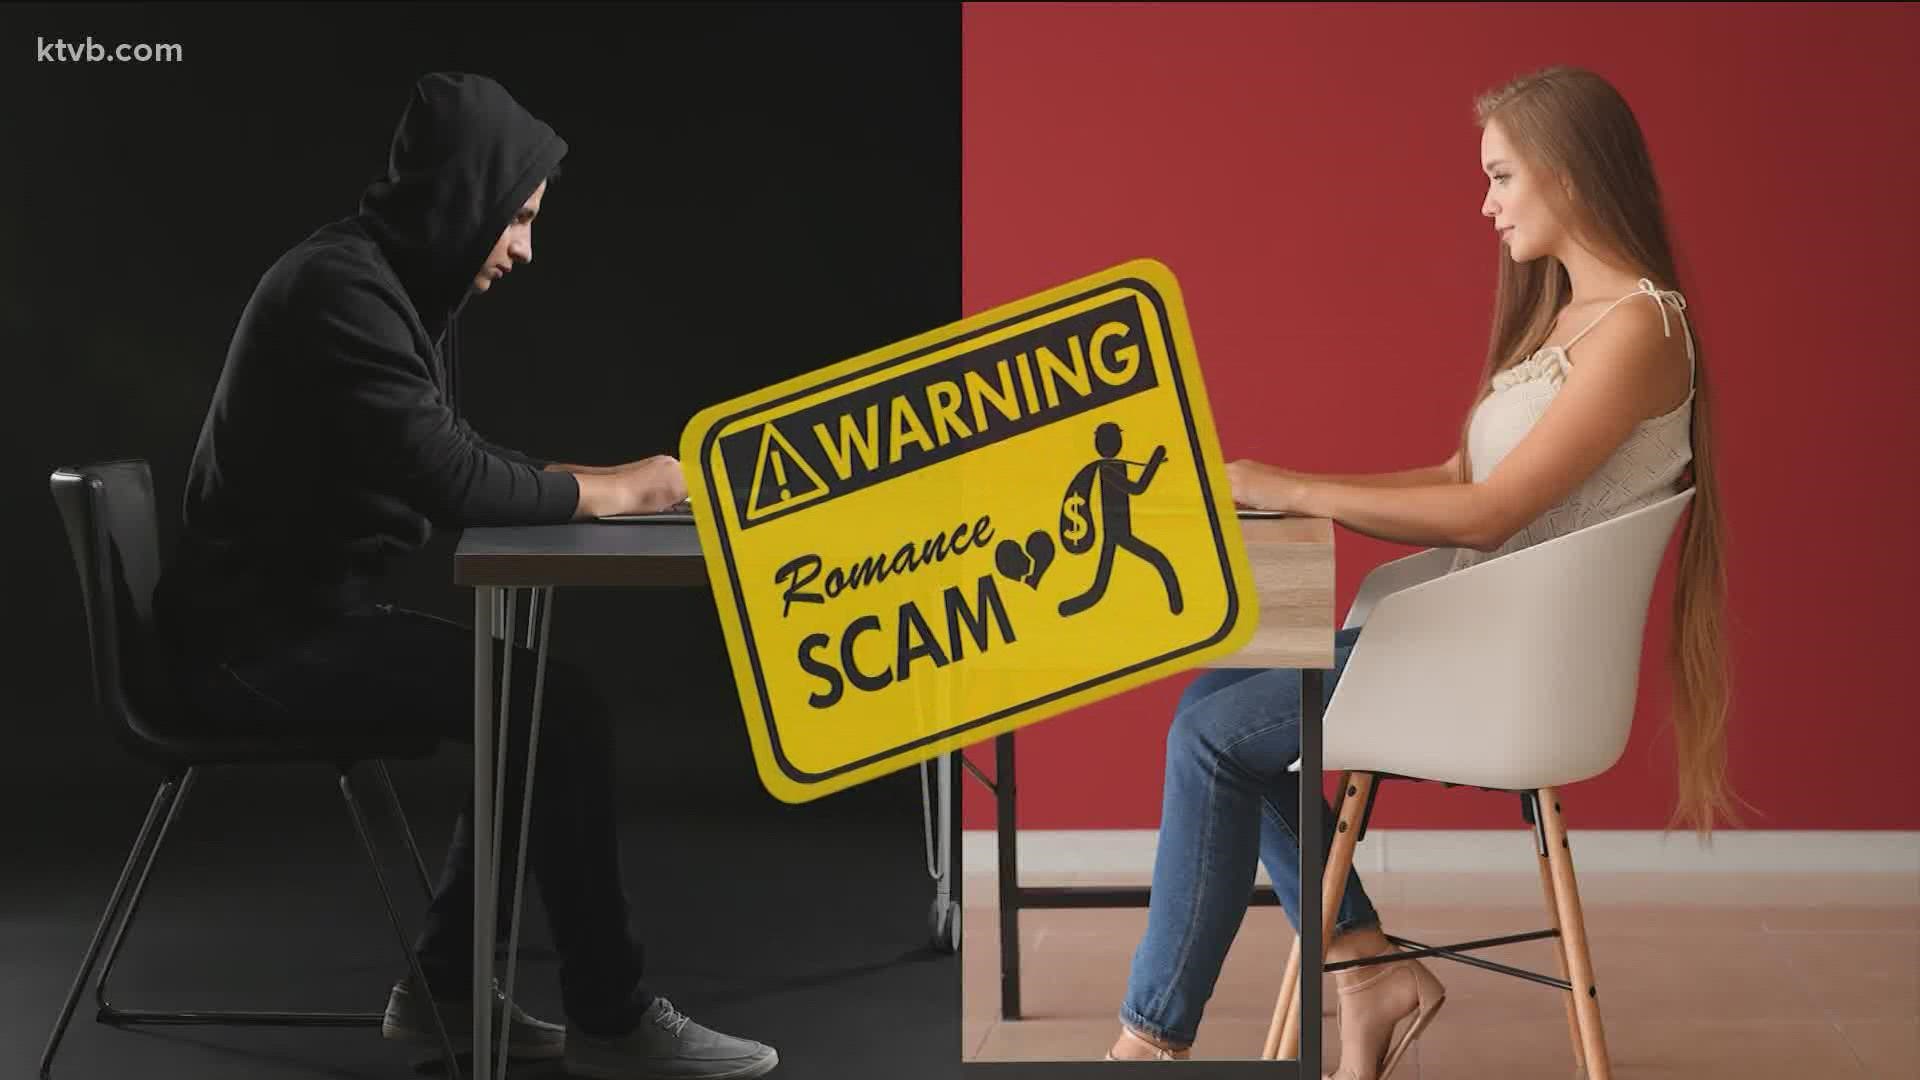 As Valentine's Day approaches, here are some red flags to watch out for and ways to protect yourself against potential romance scams.